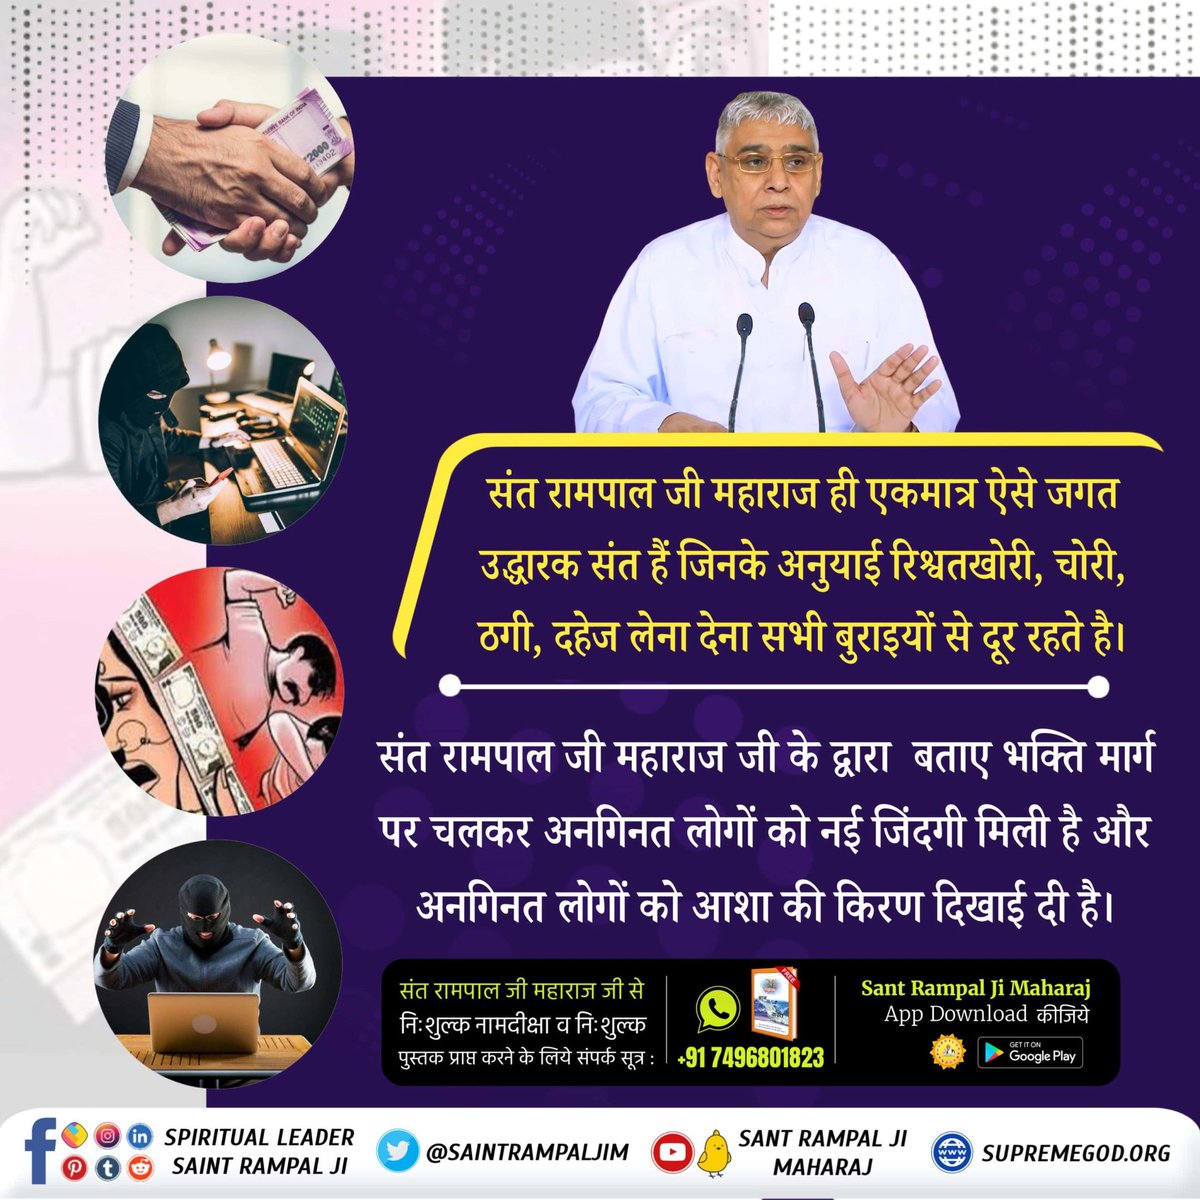 Apart from eradicating alcoholism and substance abuse, Saint Rampal Ji Maharaj is also focusing on encouraging dowry-free marriages. Dowry is the prime reason why a girl child is looked upon as a burden by the parents. #जगत_उद्धारक_संत_रामपालजी